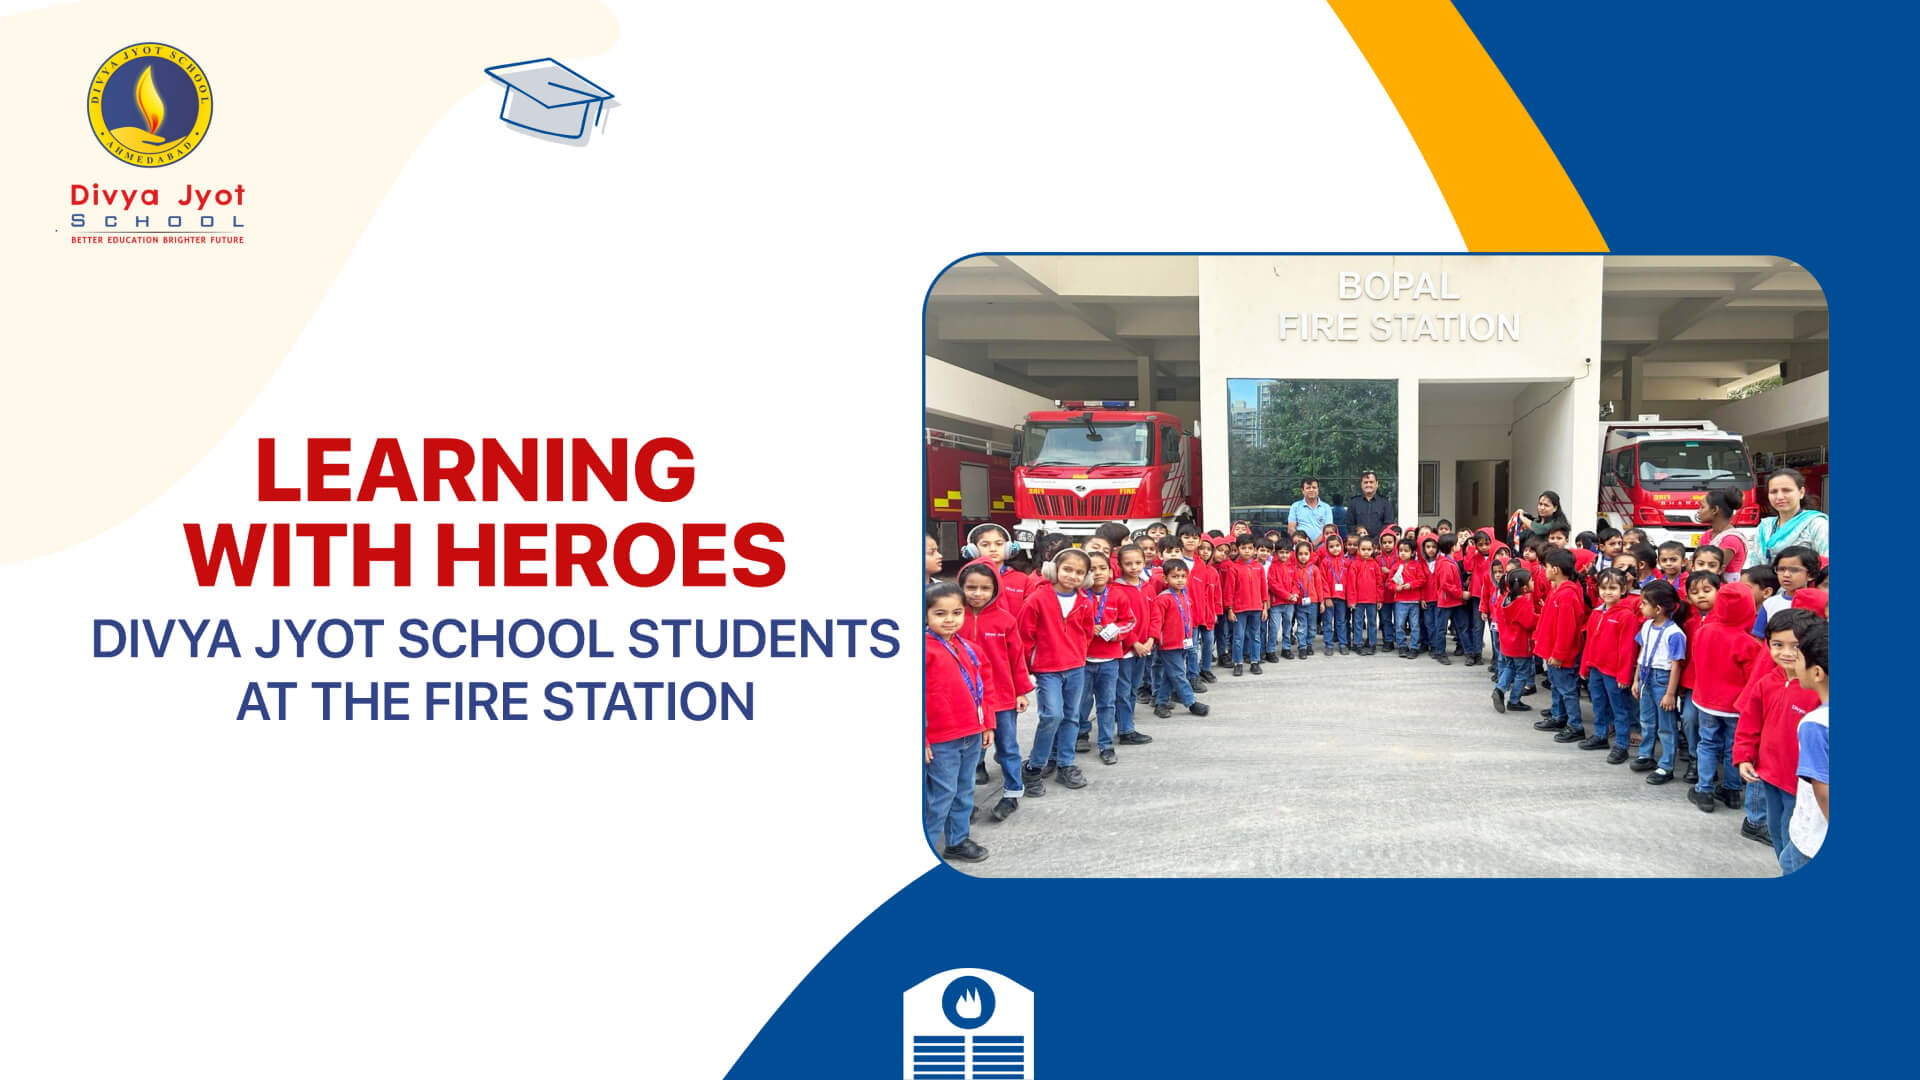 Learning with Heroes: Divya Jyot School Students at the Fire Station